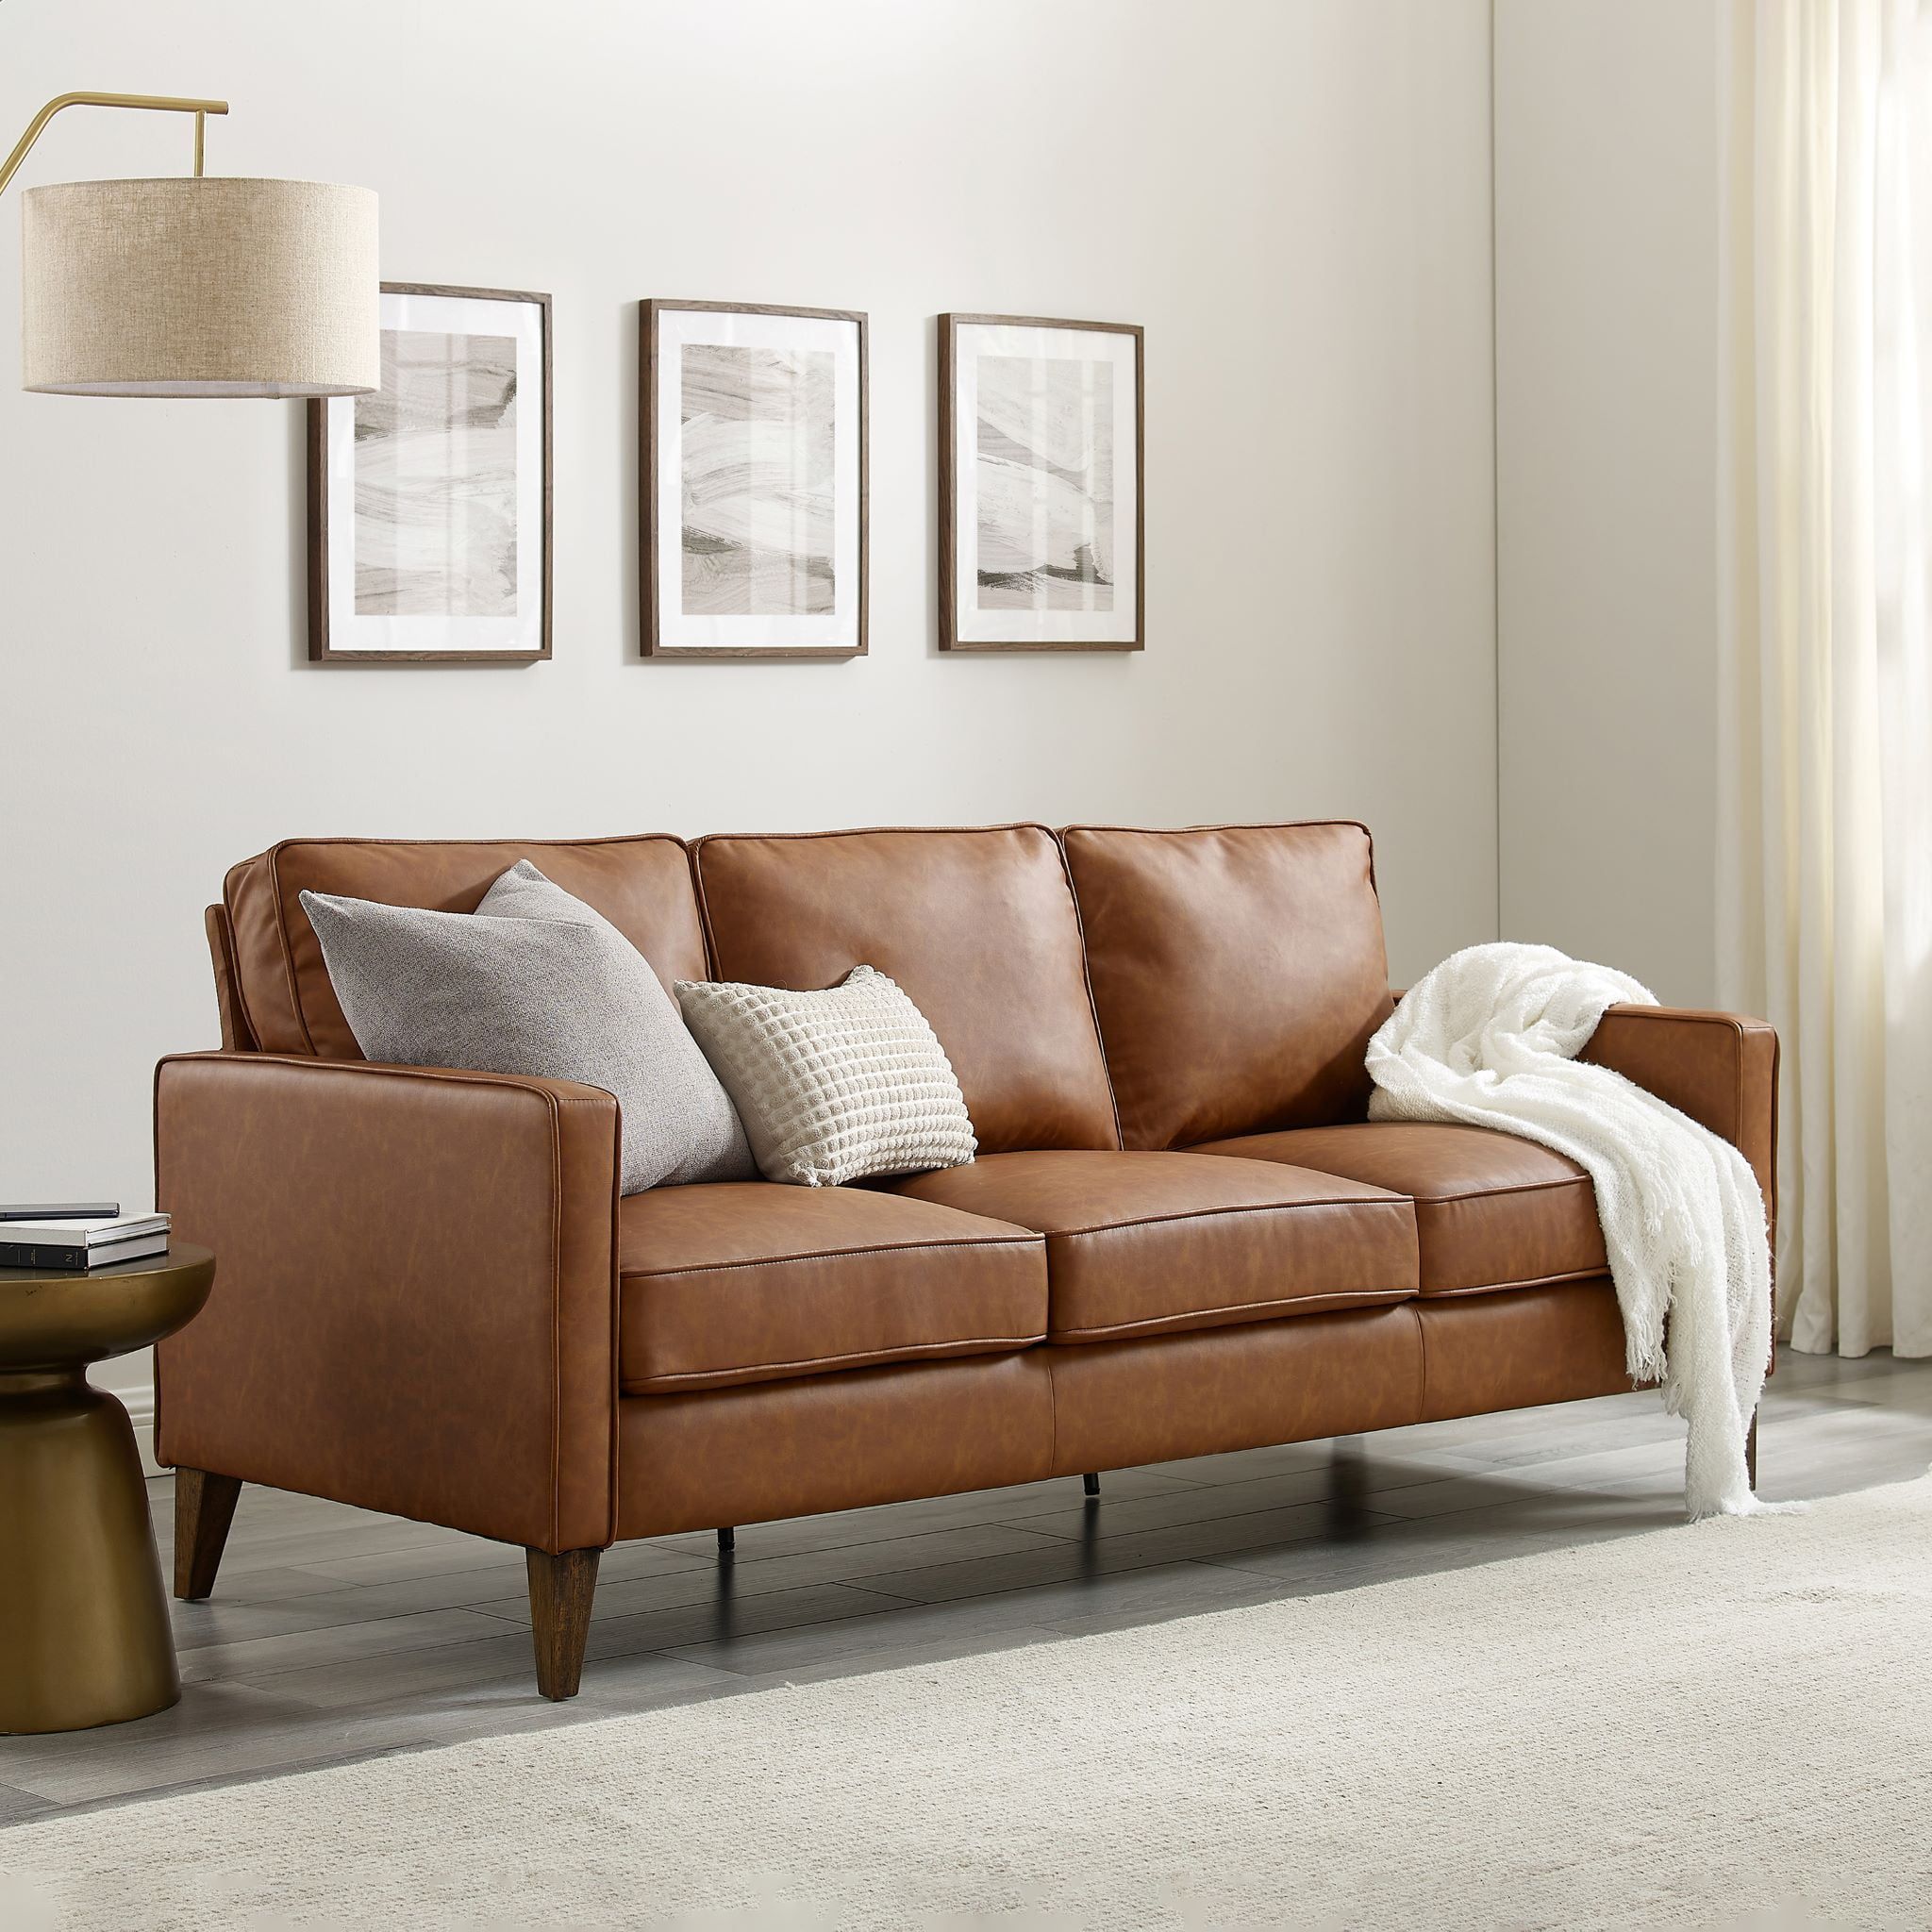 Hillsdale Jianna Faux Leather Sofa, Grey – Walmart With Regard To Faux Leather Sofas (View 5 of 15)